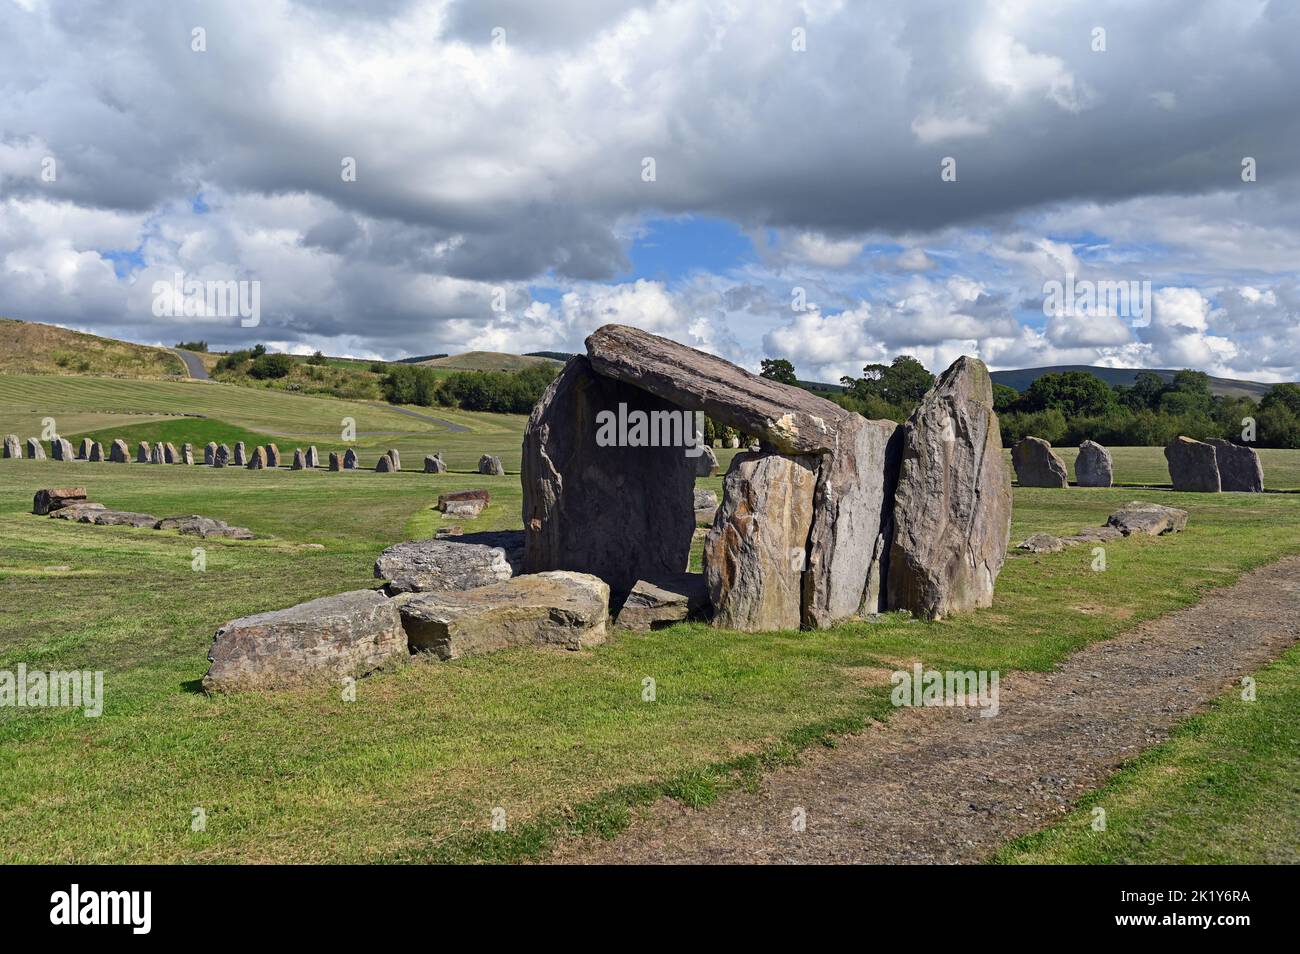 'Comet Collisions'. outdoor artwork by Charles Jencks. Crawick Multiverse, Sanquhar, Dumfries and Galloway, Scotland, United Kingdom, Europe. Stock Photo